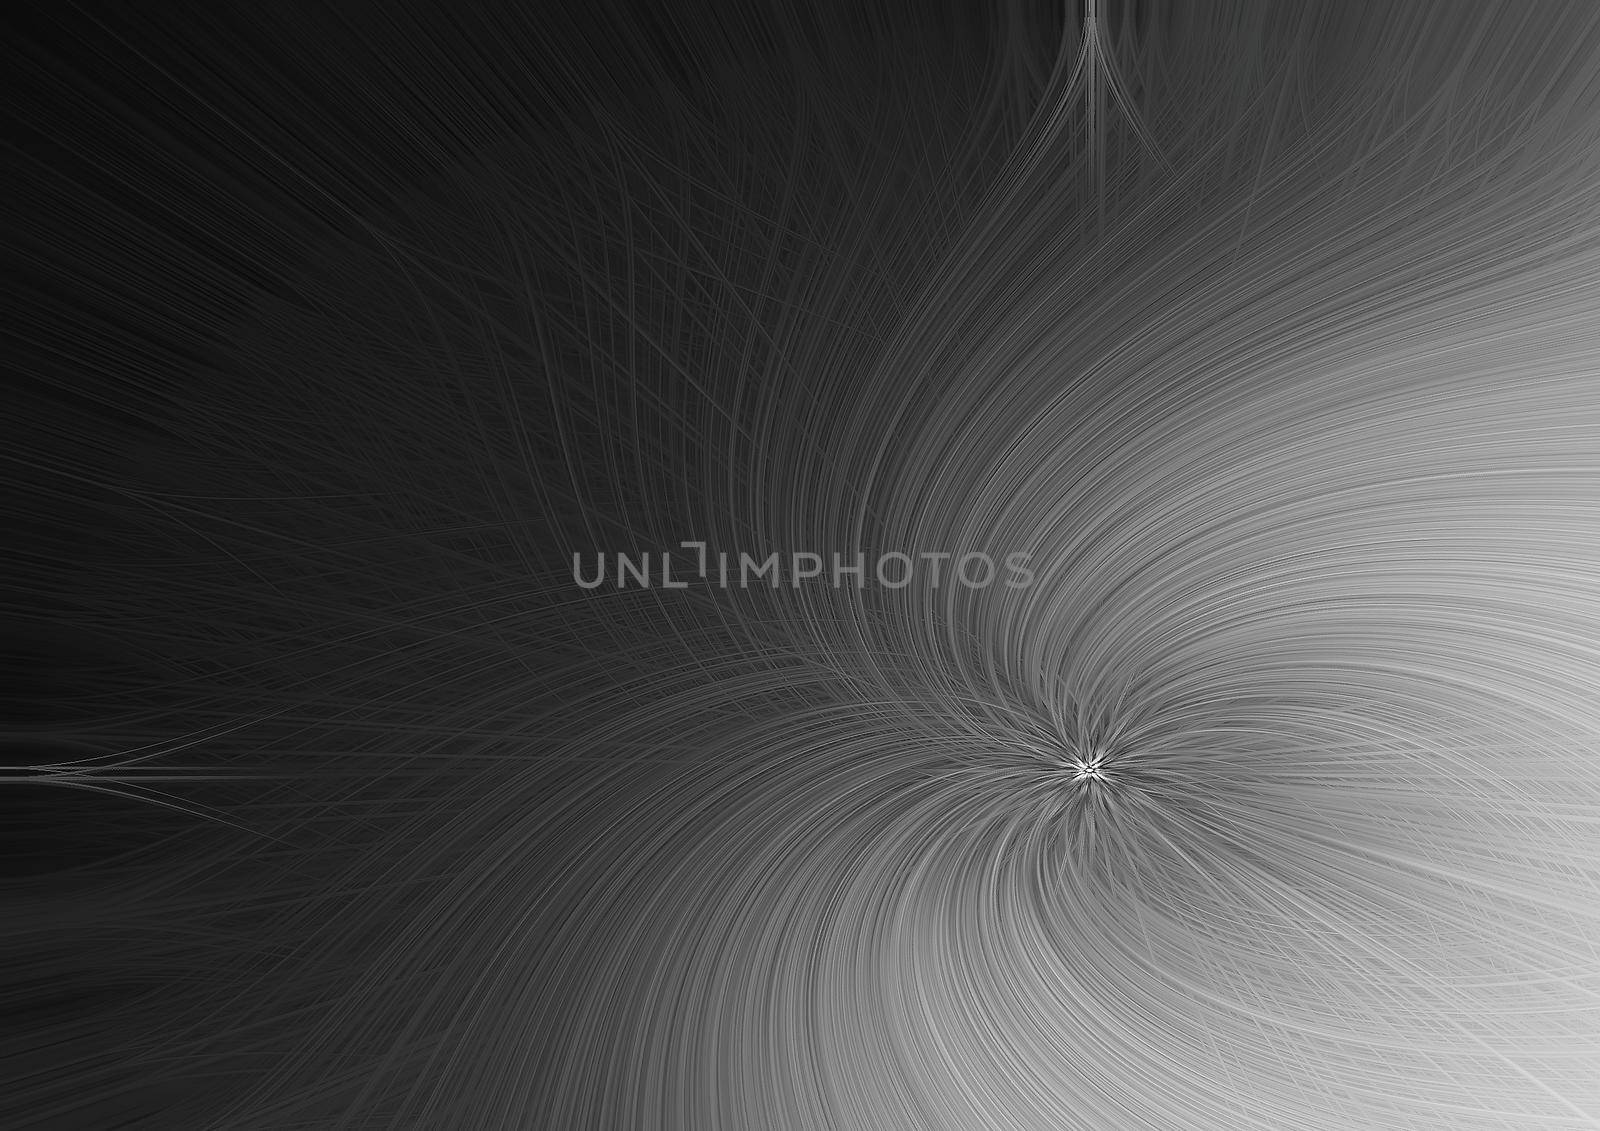 Illustration in shades of gray, fantastic vortex of rays by rostik924